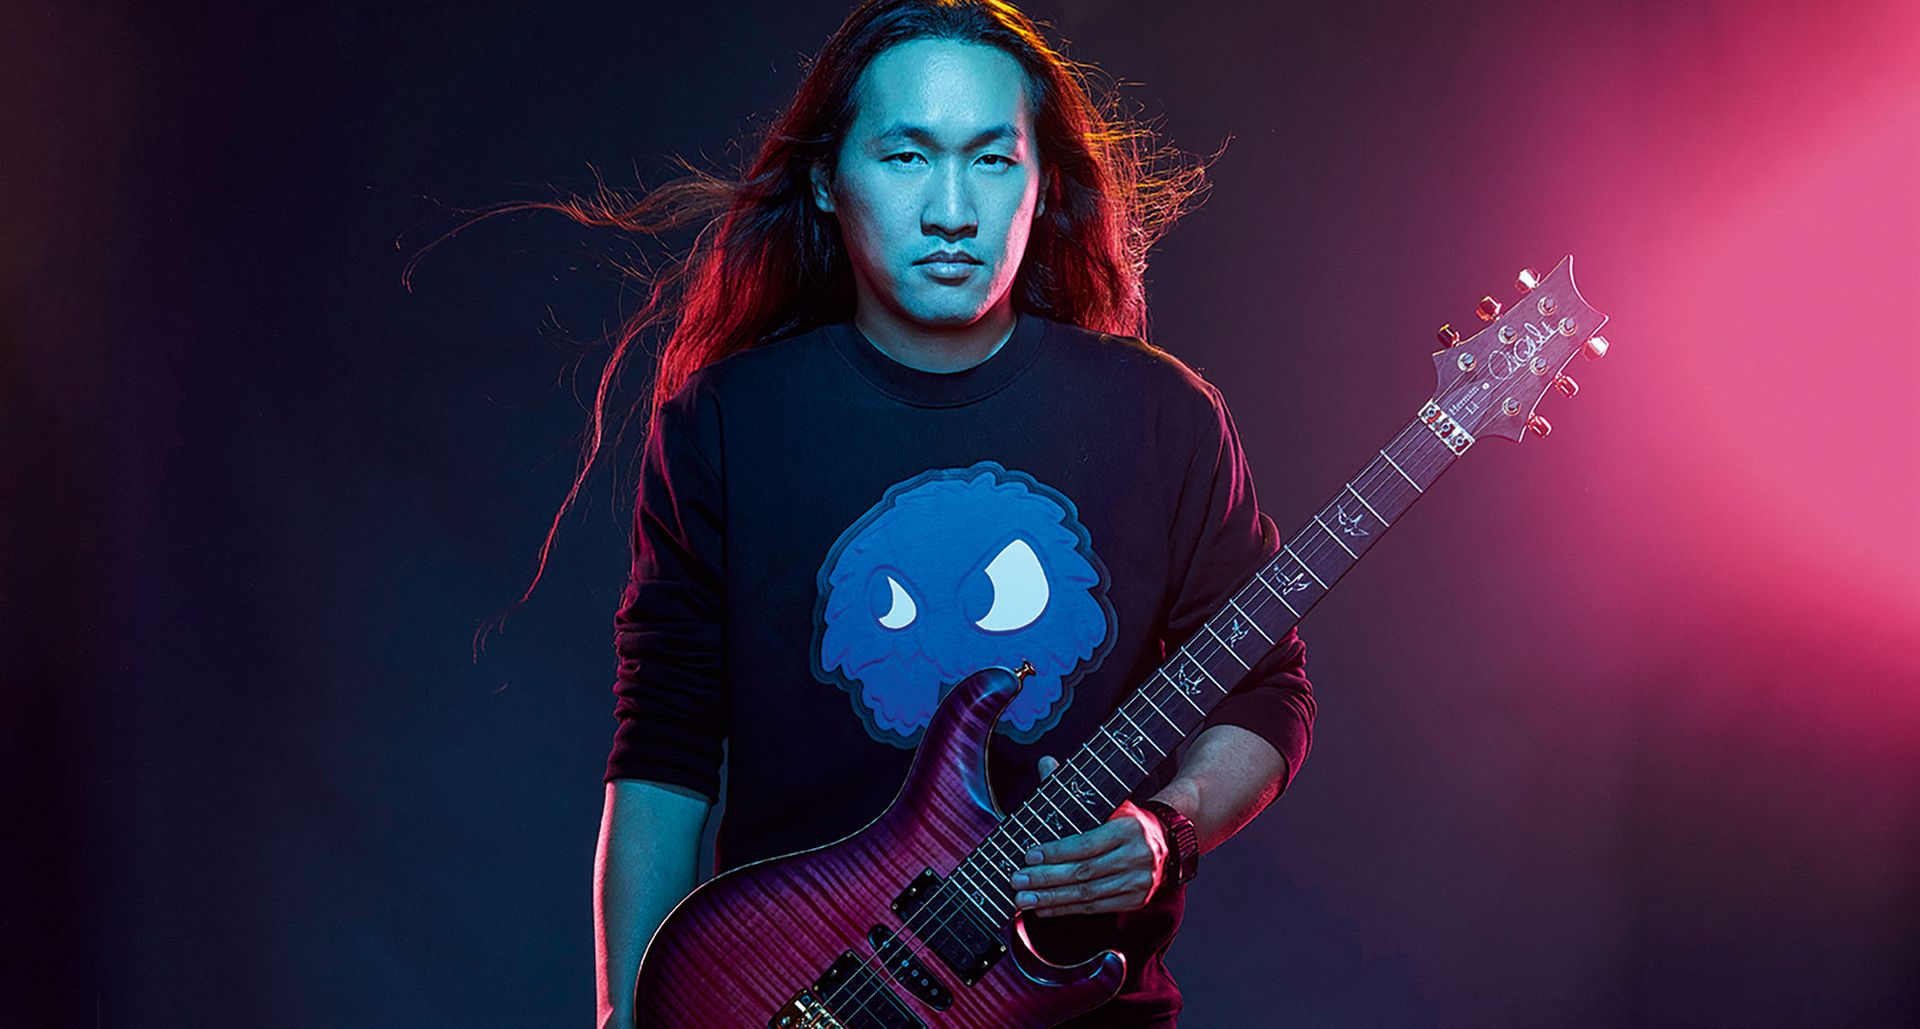 “paul said he’d do anything to make it happen”: herman li on his switch to prs